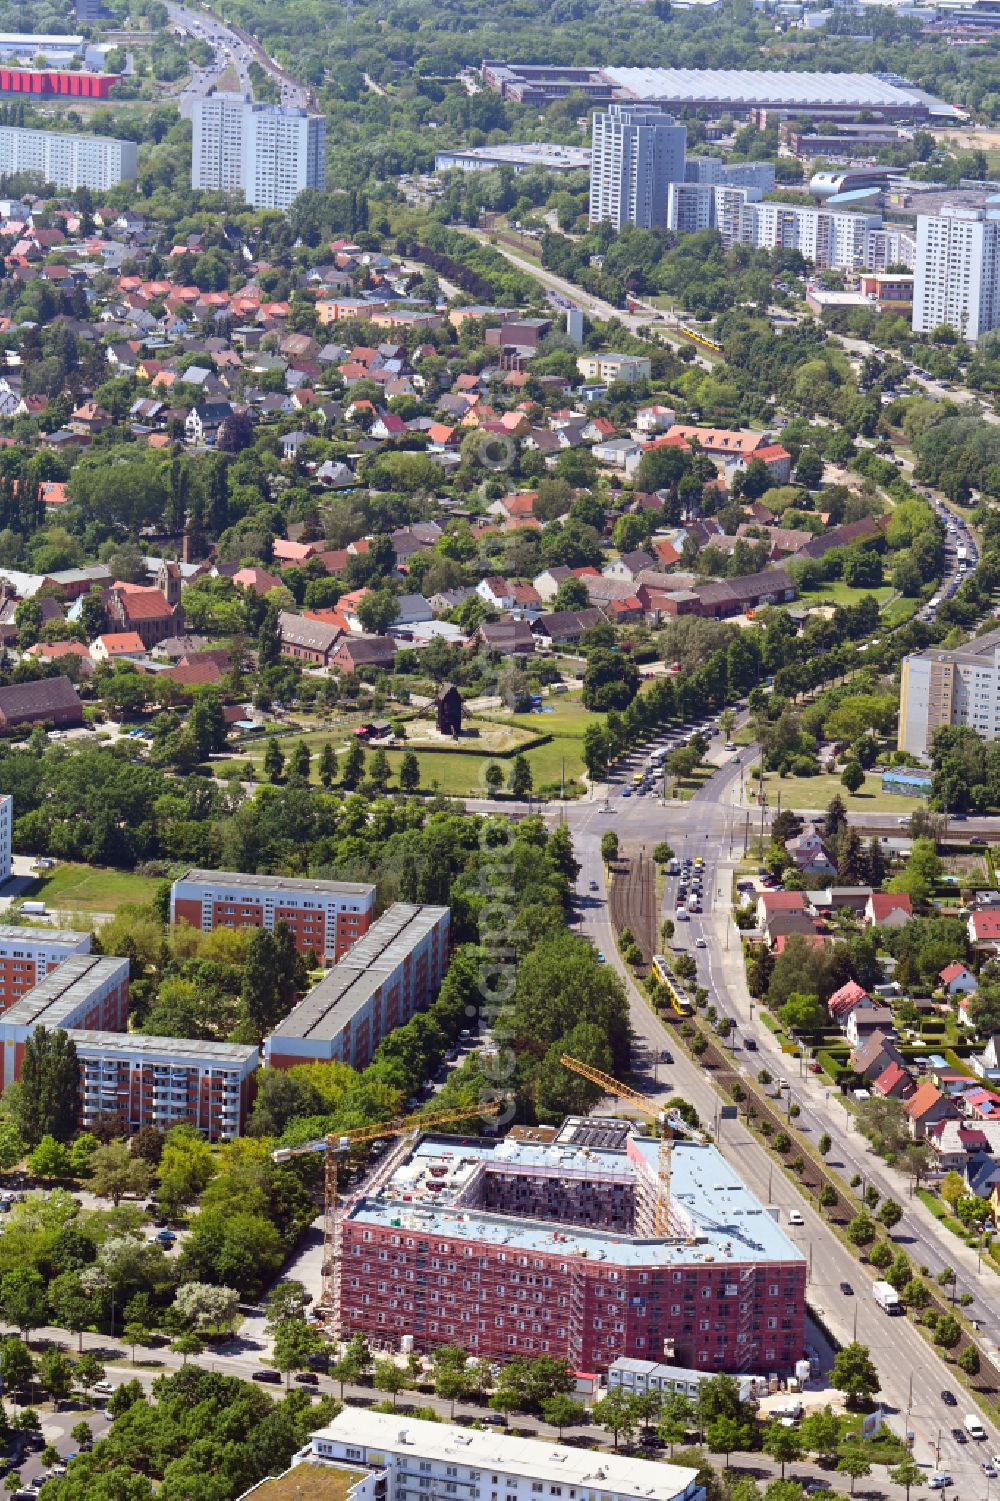 Berlin from the bird's eye view: Construction site for the multi-family residential building Poehlbergstrasse - Blumberger Damm - Landsberger Allee in the district Marzahn in Berlin, Germany